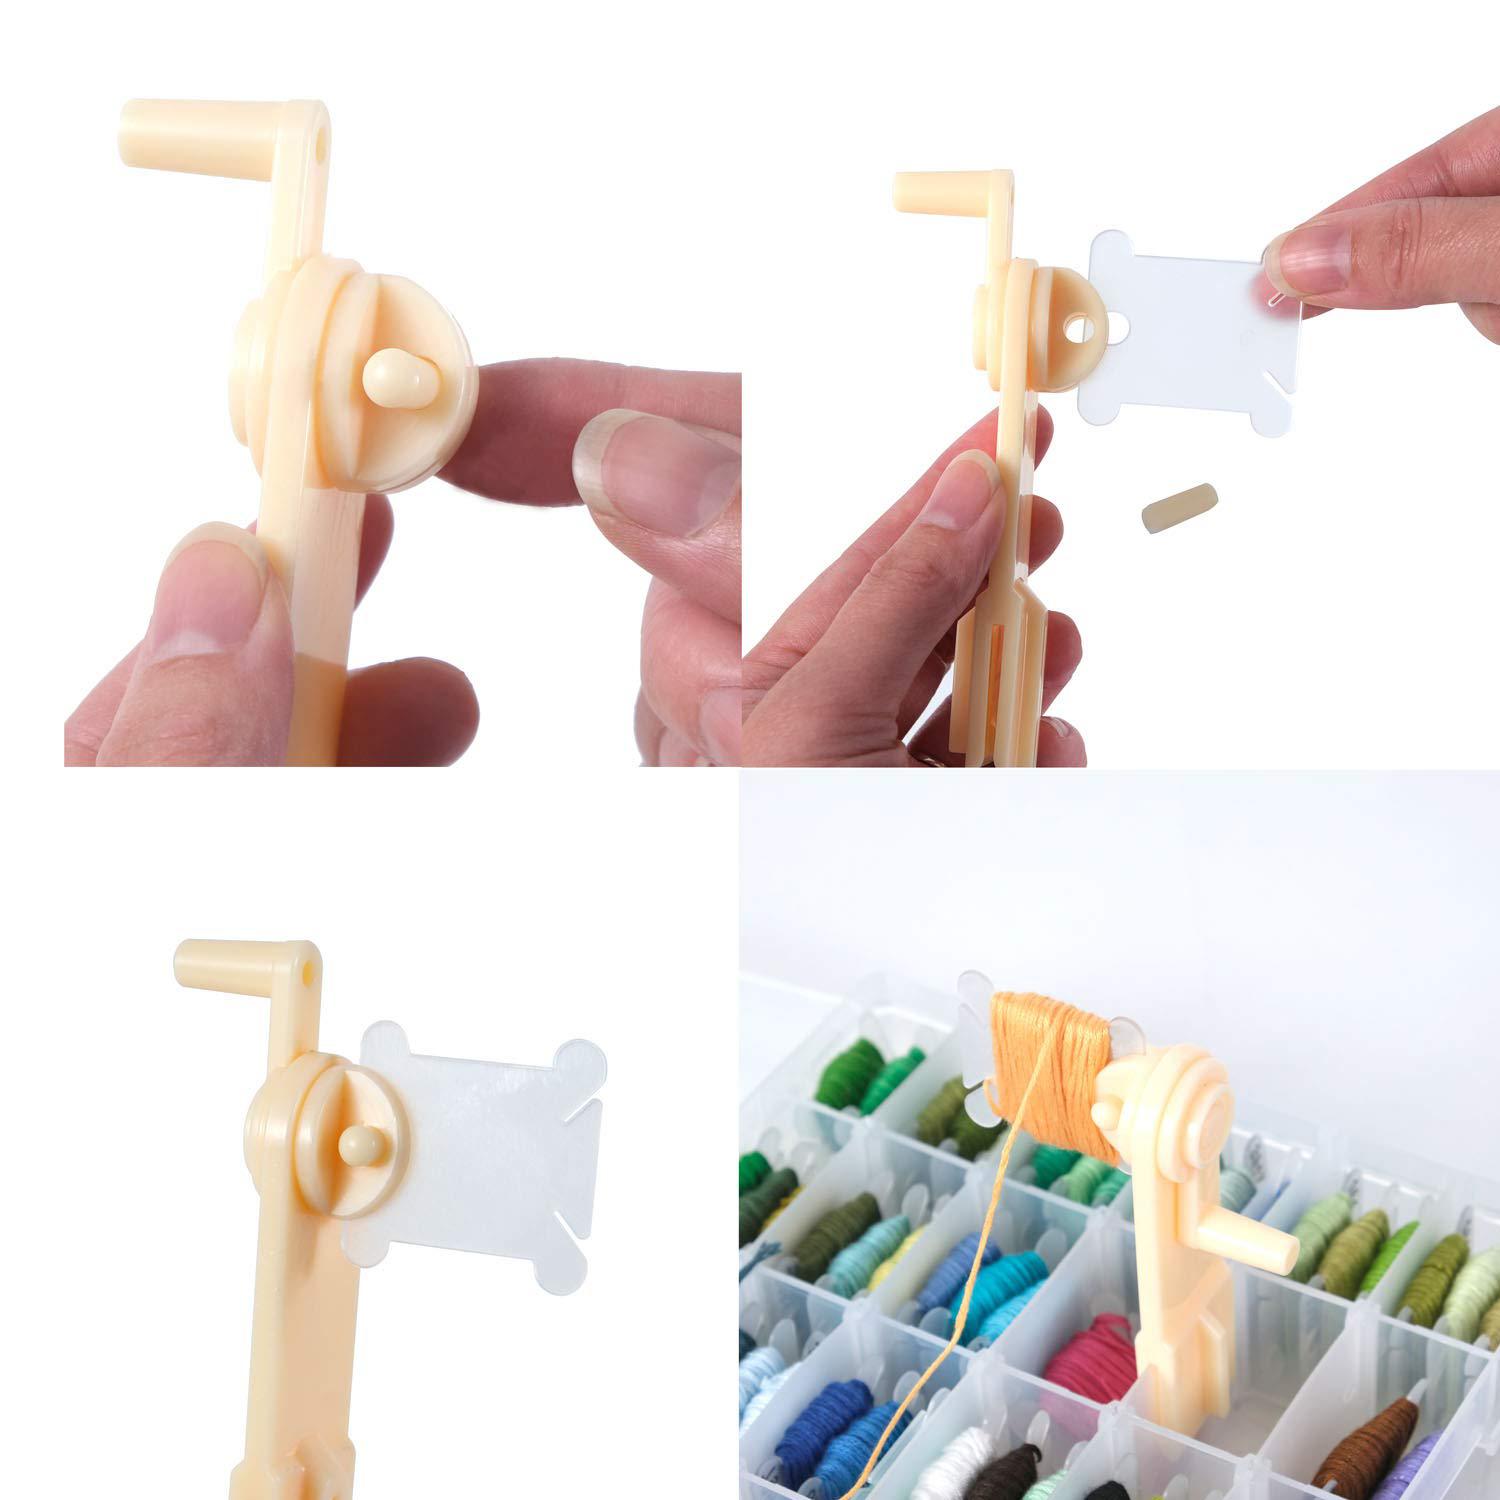 Sys 200 pieces plastic floss bobbins with bobbin winder for cross stitch cotton thread craft diy sewing storage, white